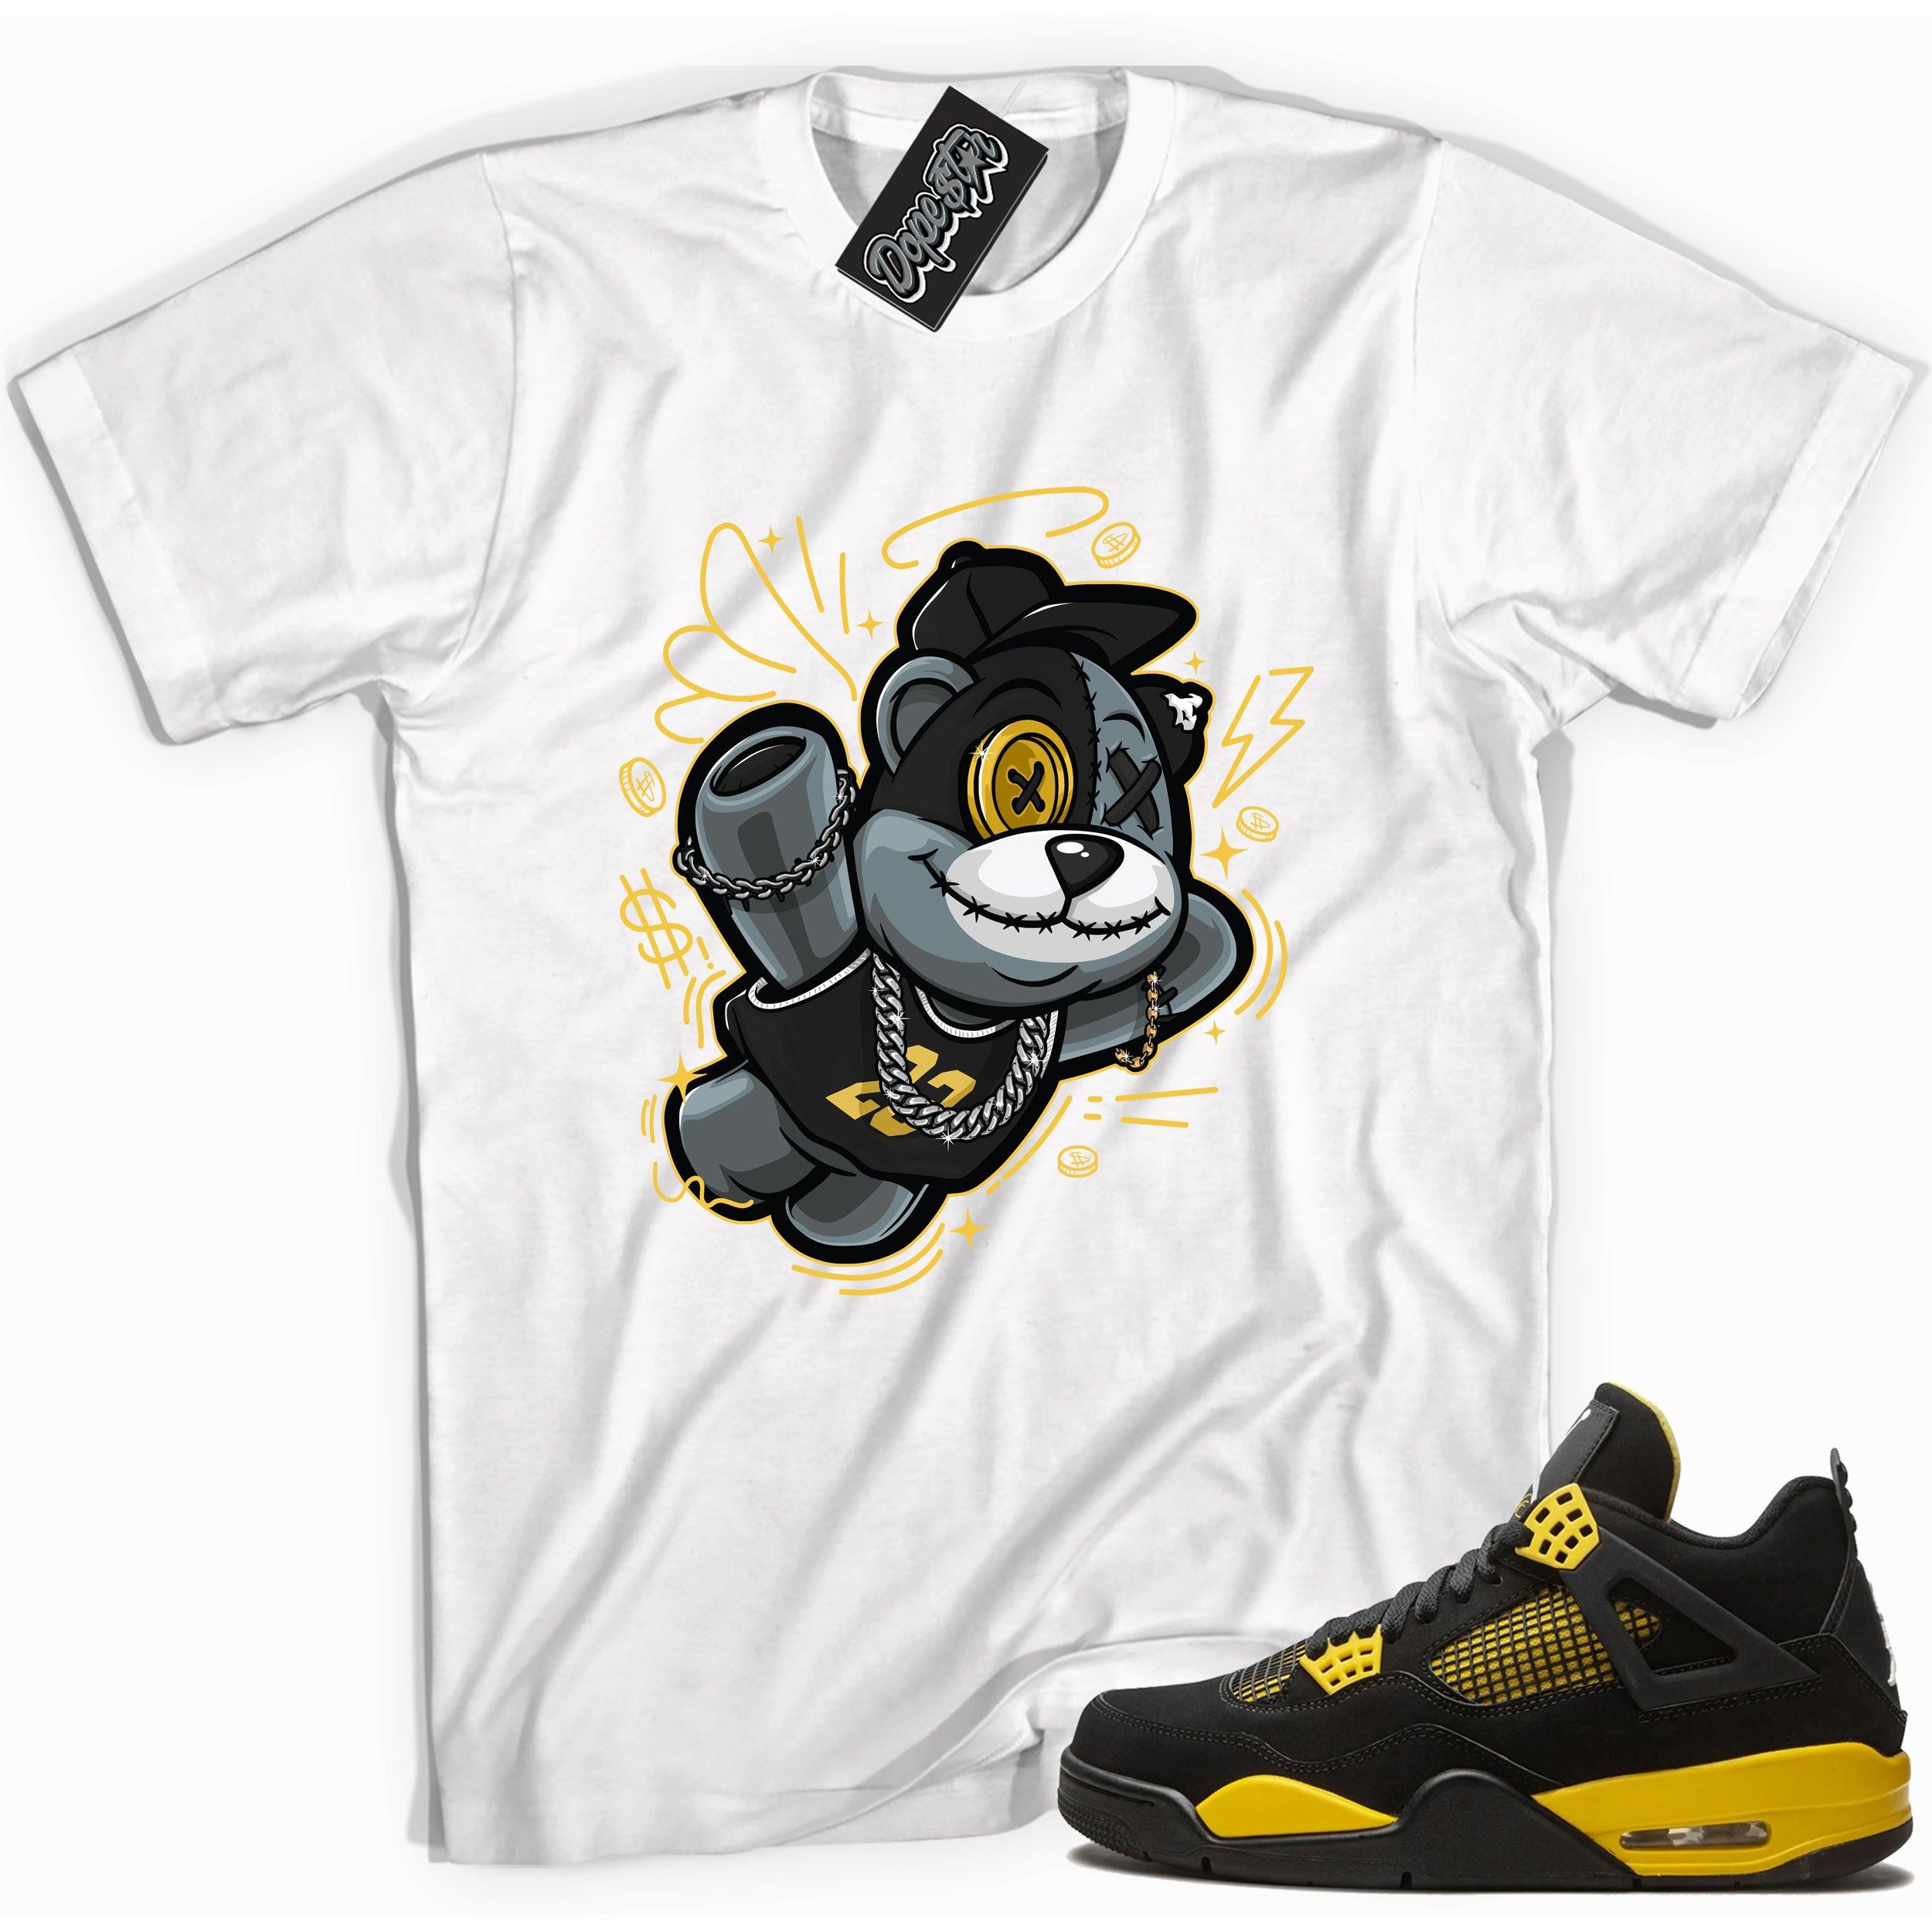 Cool white graphic tee with 'slam dunk bear' print, that perfectly matches Air Jordan 4 Thunder sneakers